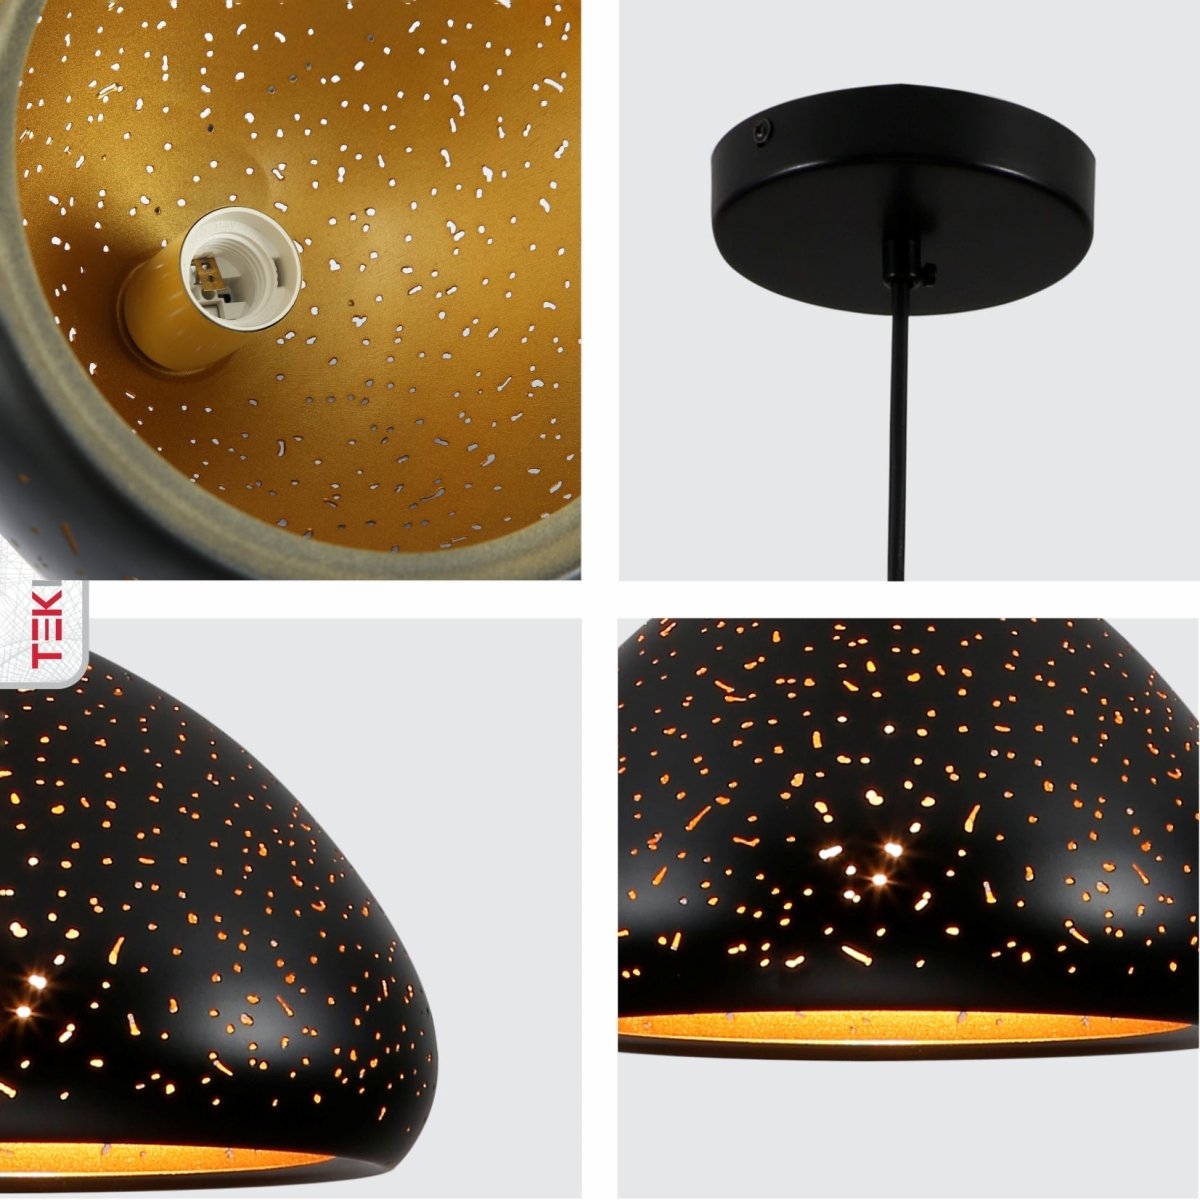 Detailed shots of Black Gold Dome Moroccan Night Milkyway Ceiling Pendant Light with E27 Fitting | TEKLED 150-18380